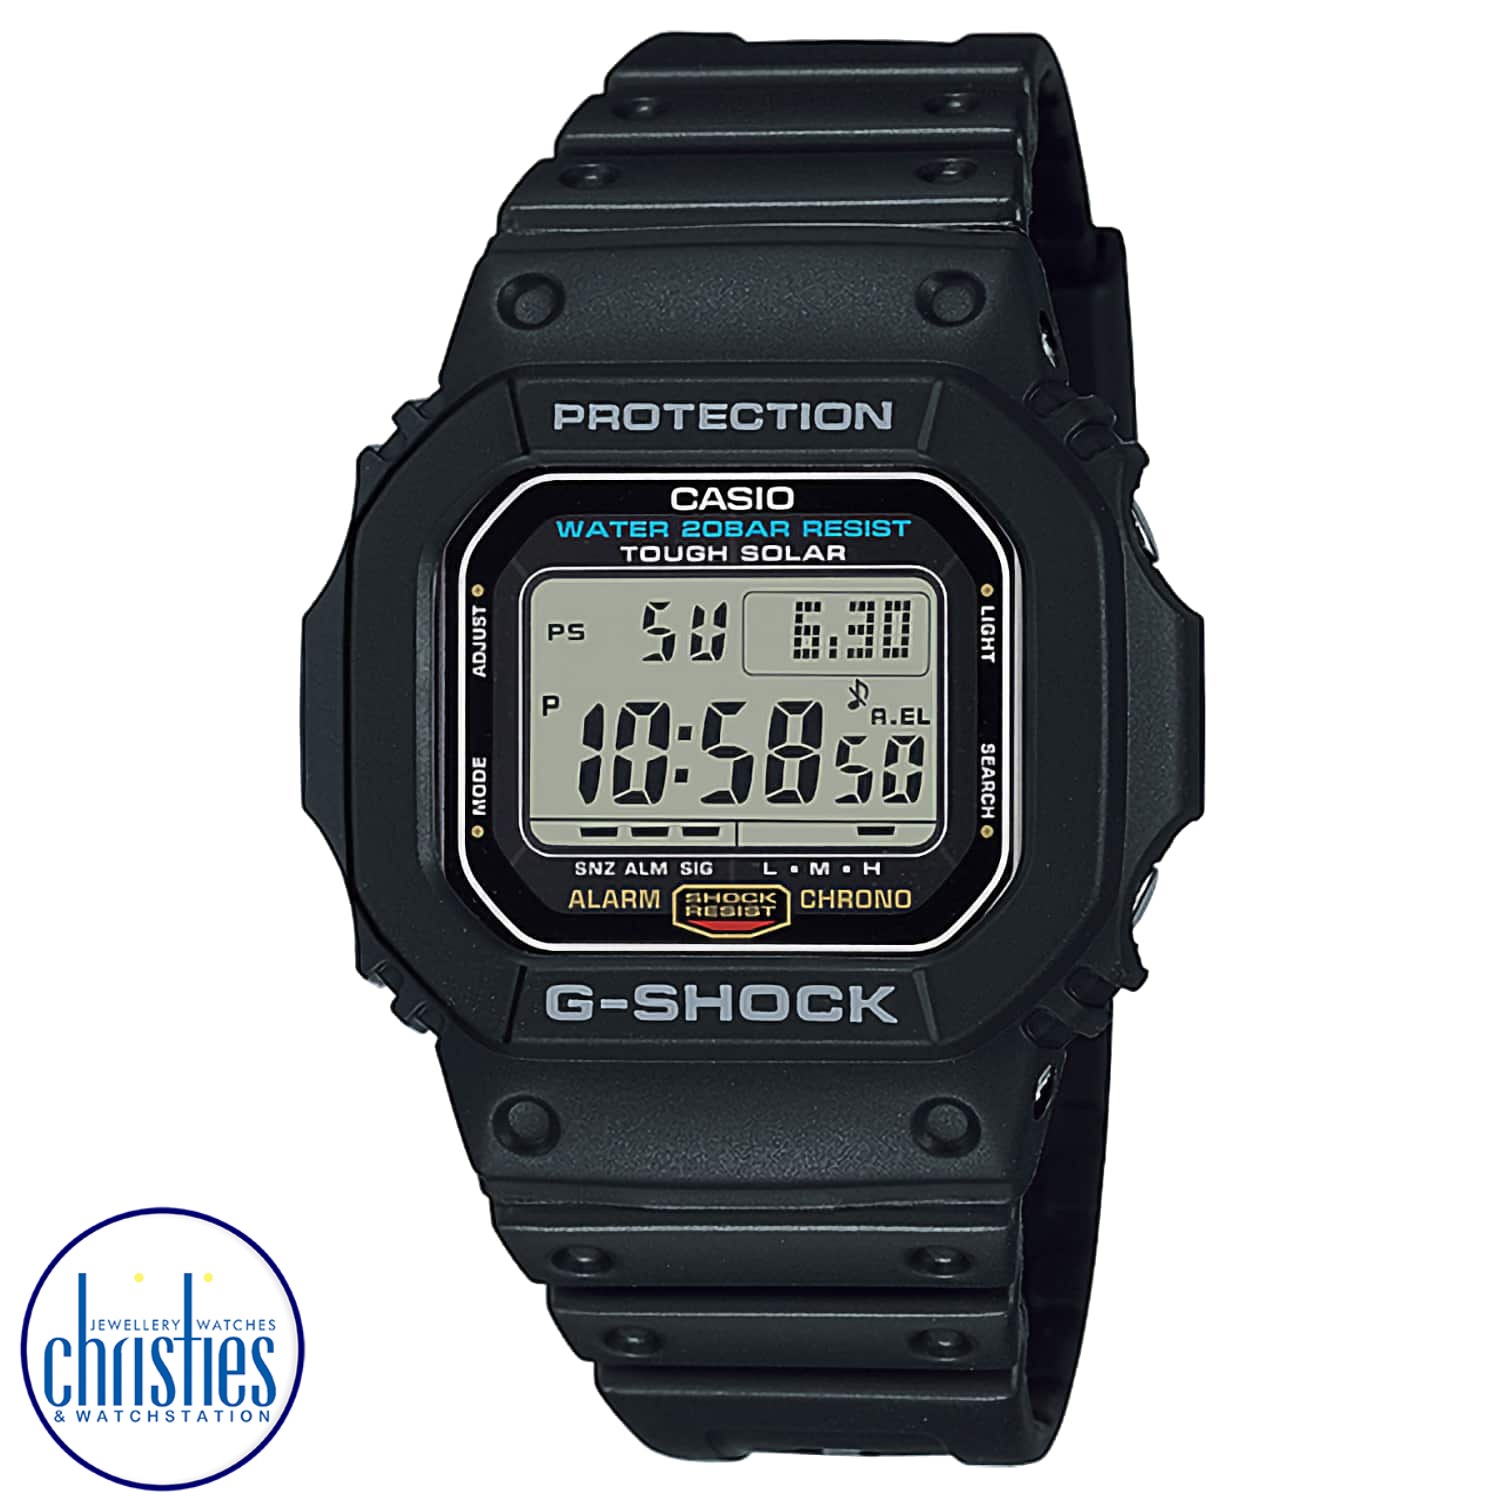 G5600UE-1 Casio Solar G-Shock. These Tough Solar models provide a choice of either the original G-5600 G-SHOCK design or the G-6900 design that is so popular among followers of today's street fashions. The Tough Solar system, which is equipped without G-s